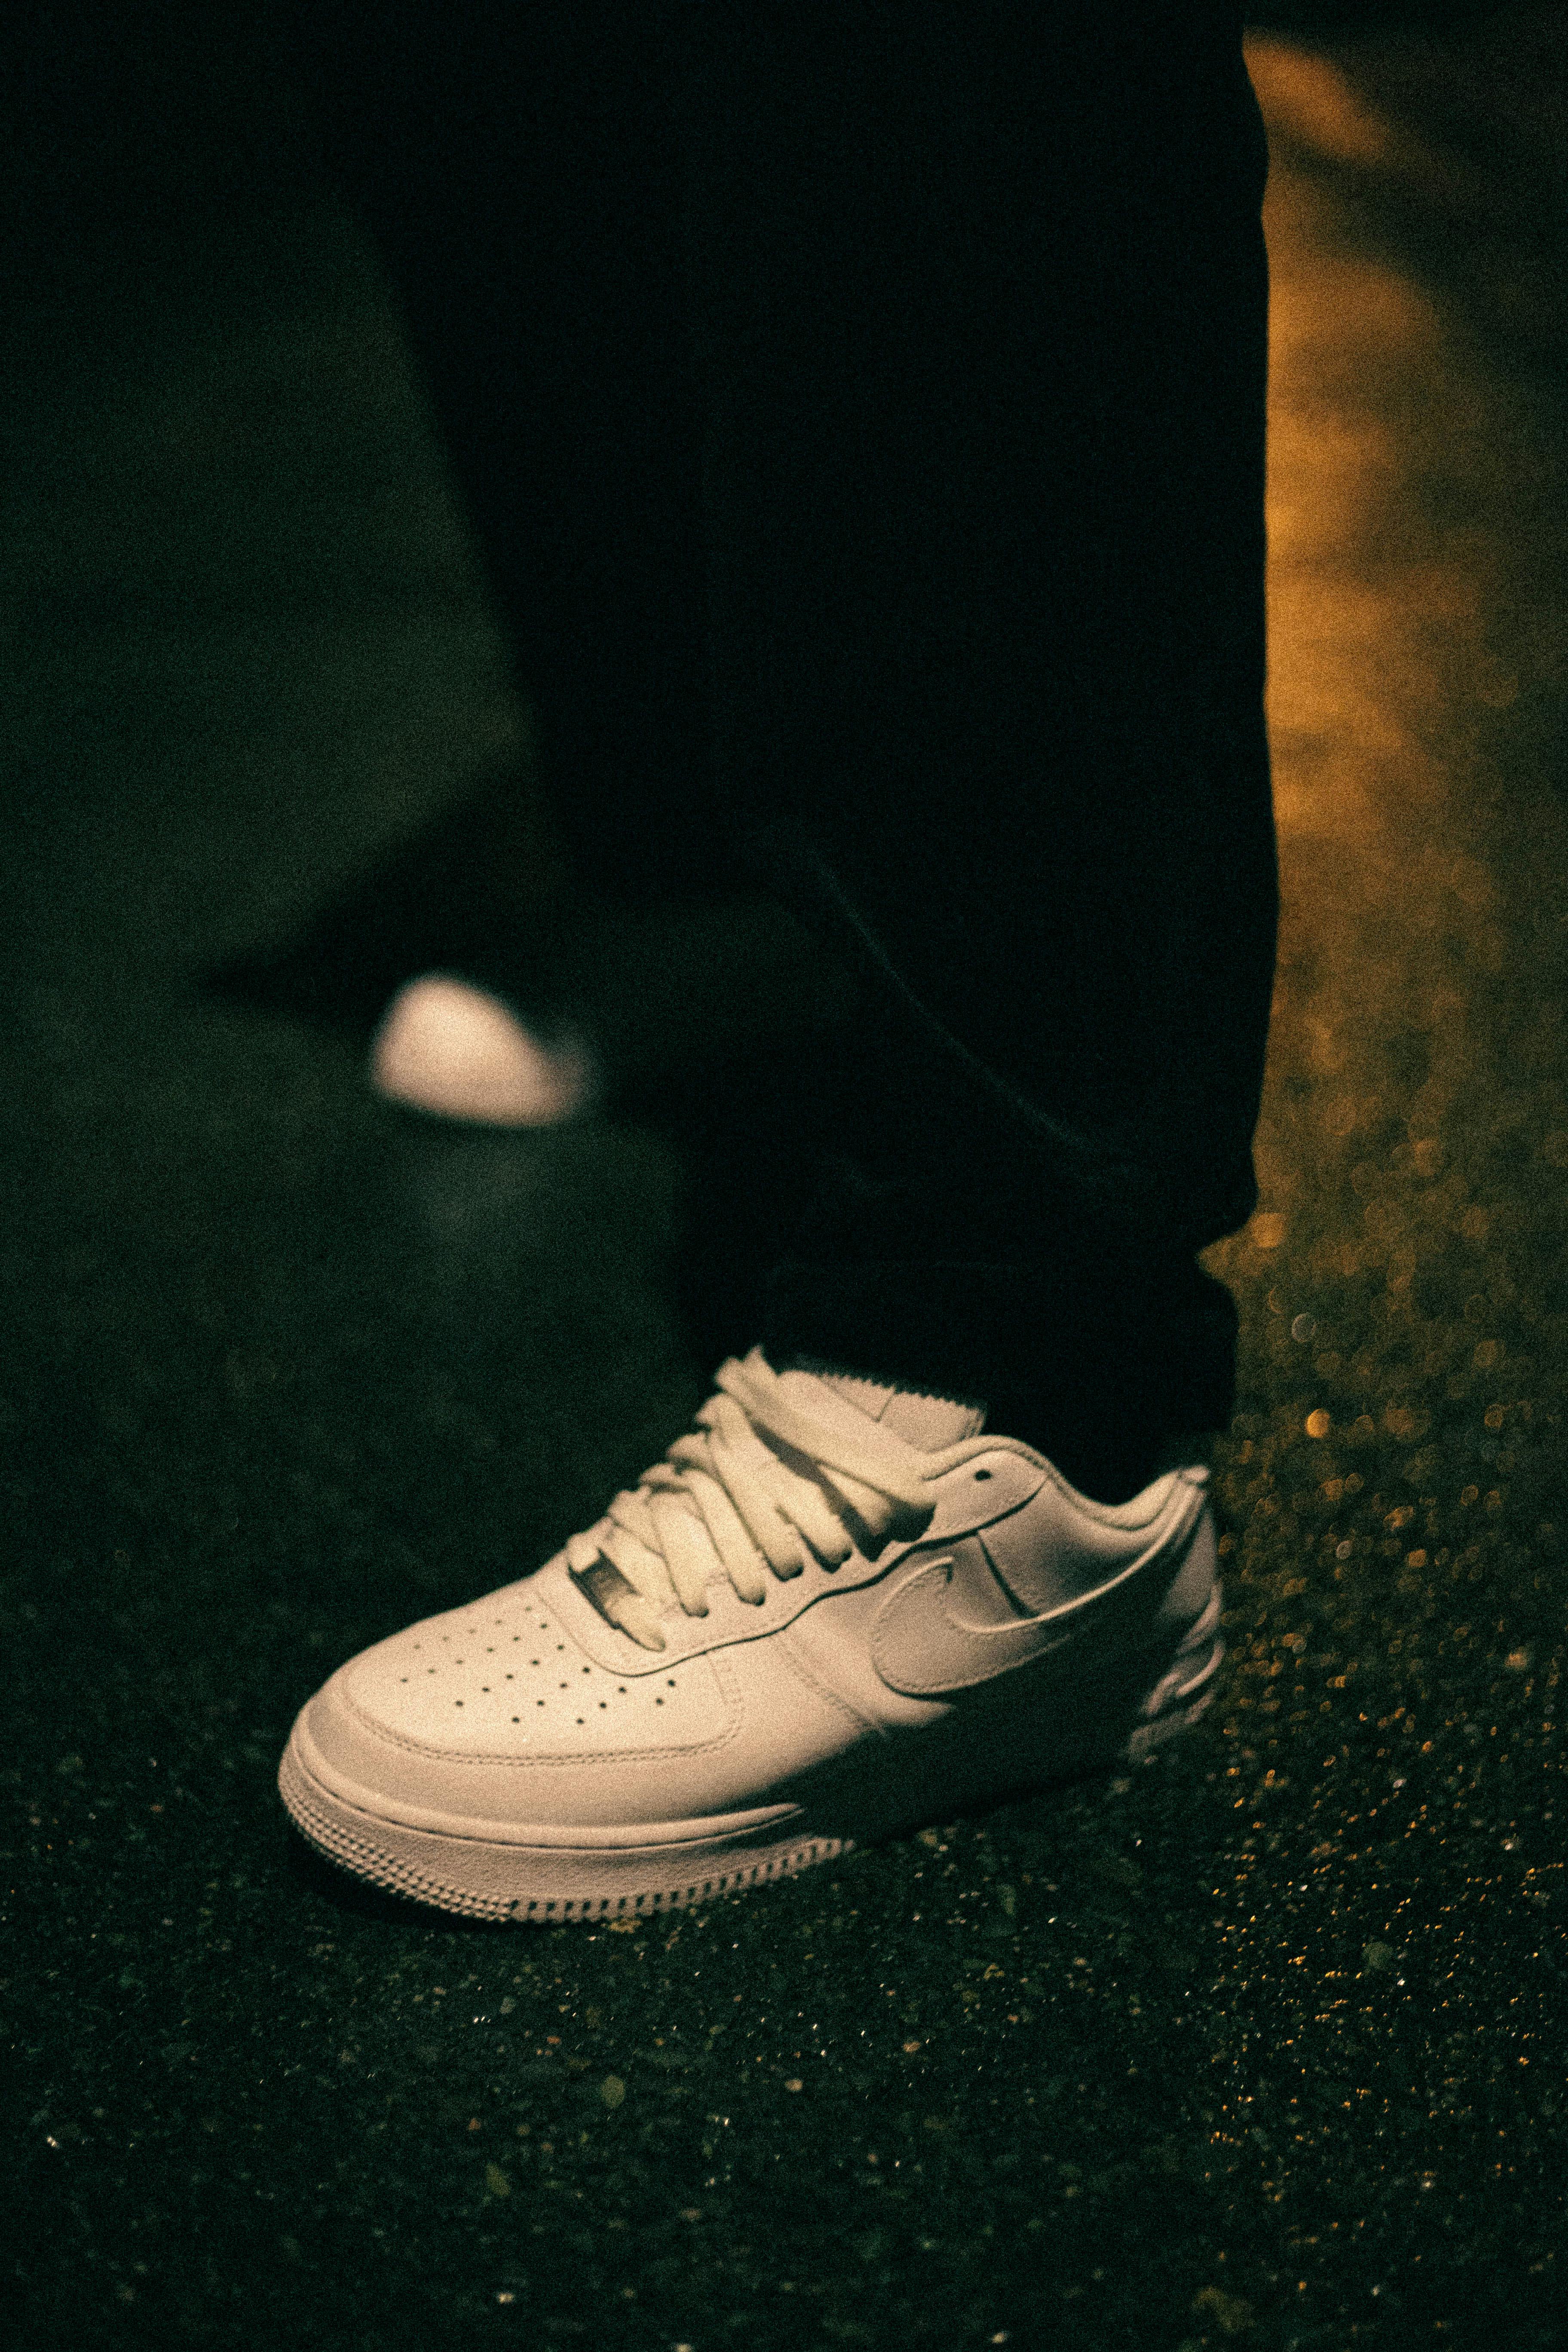 close up photo of a person wearing white shoe